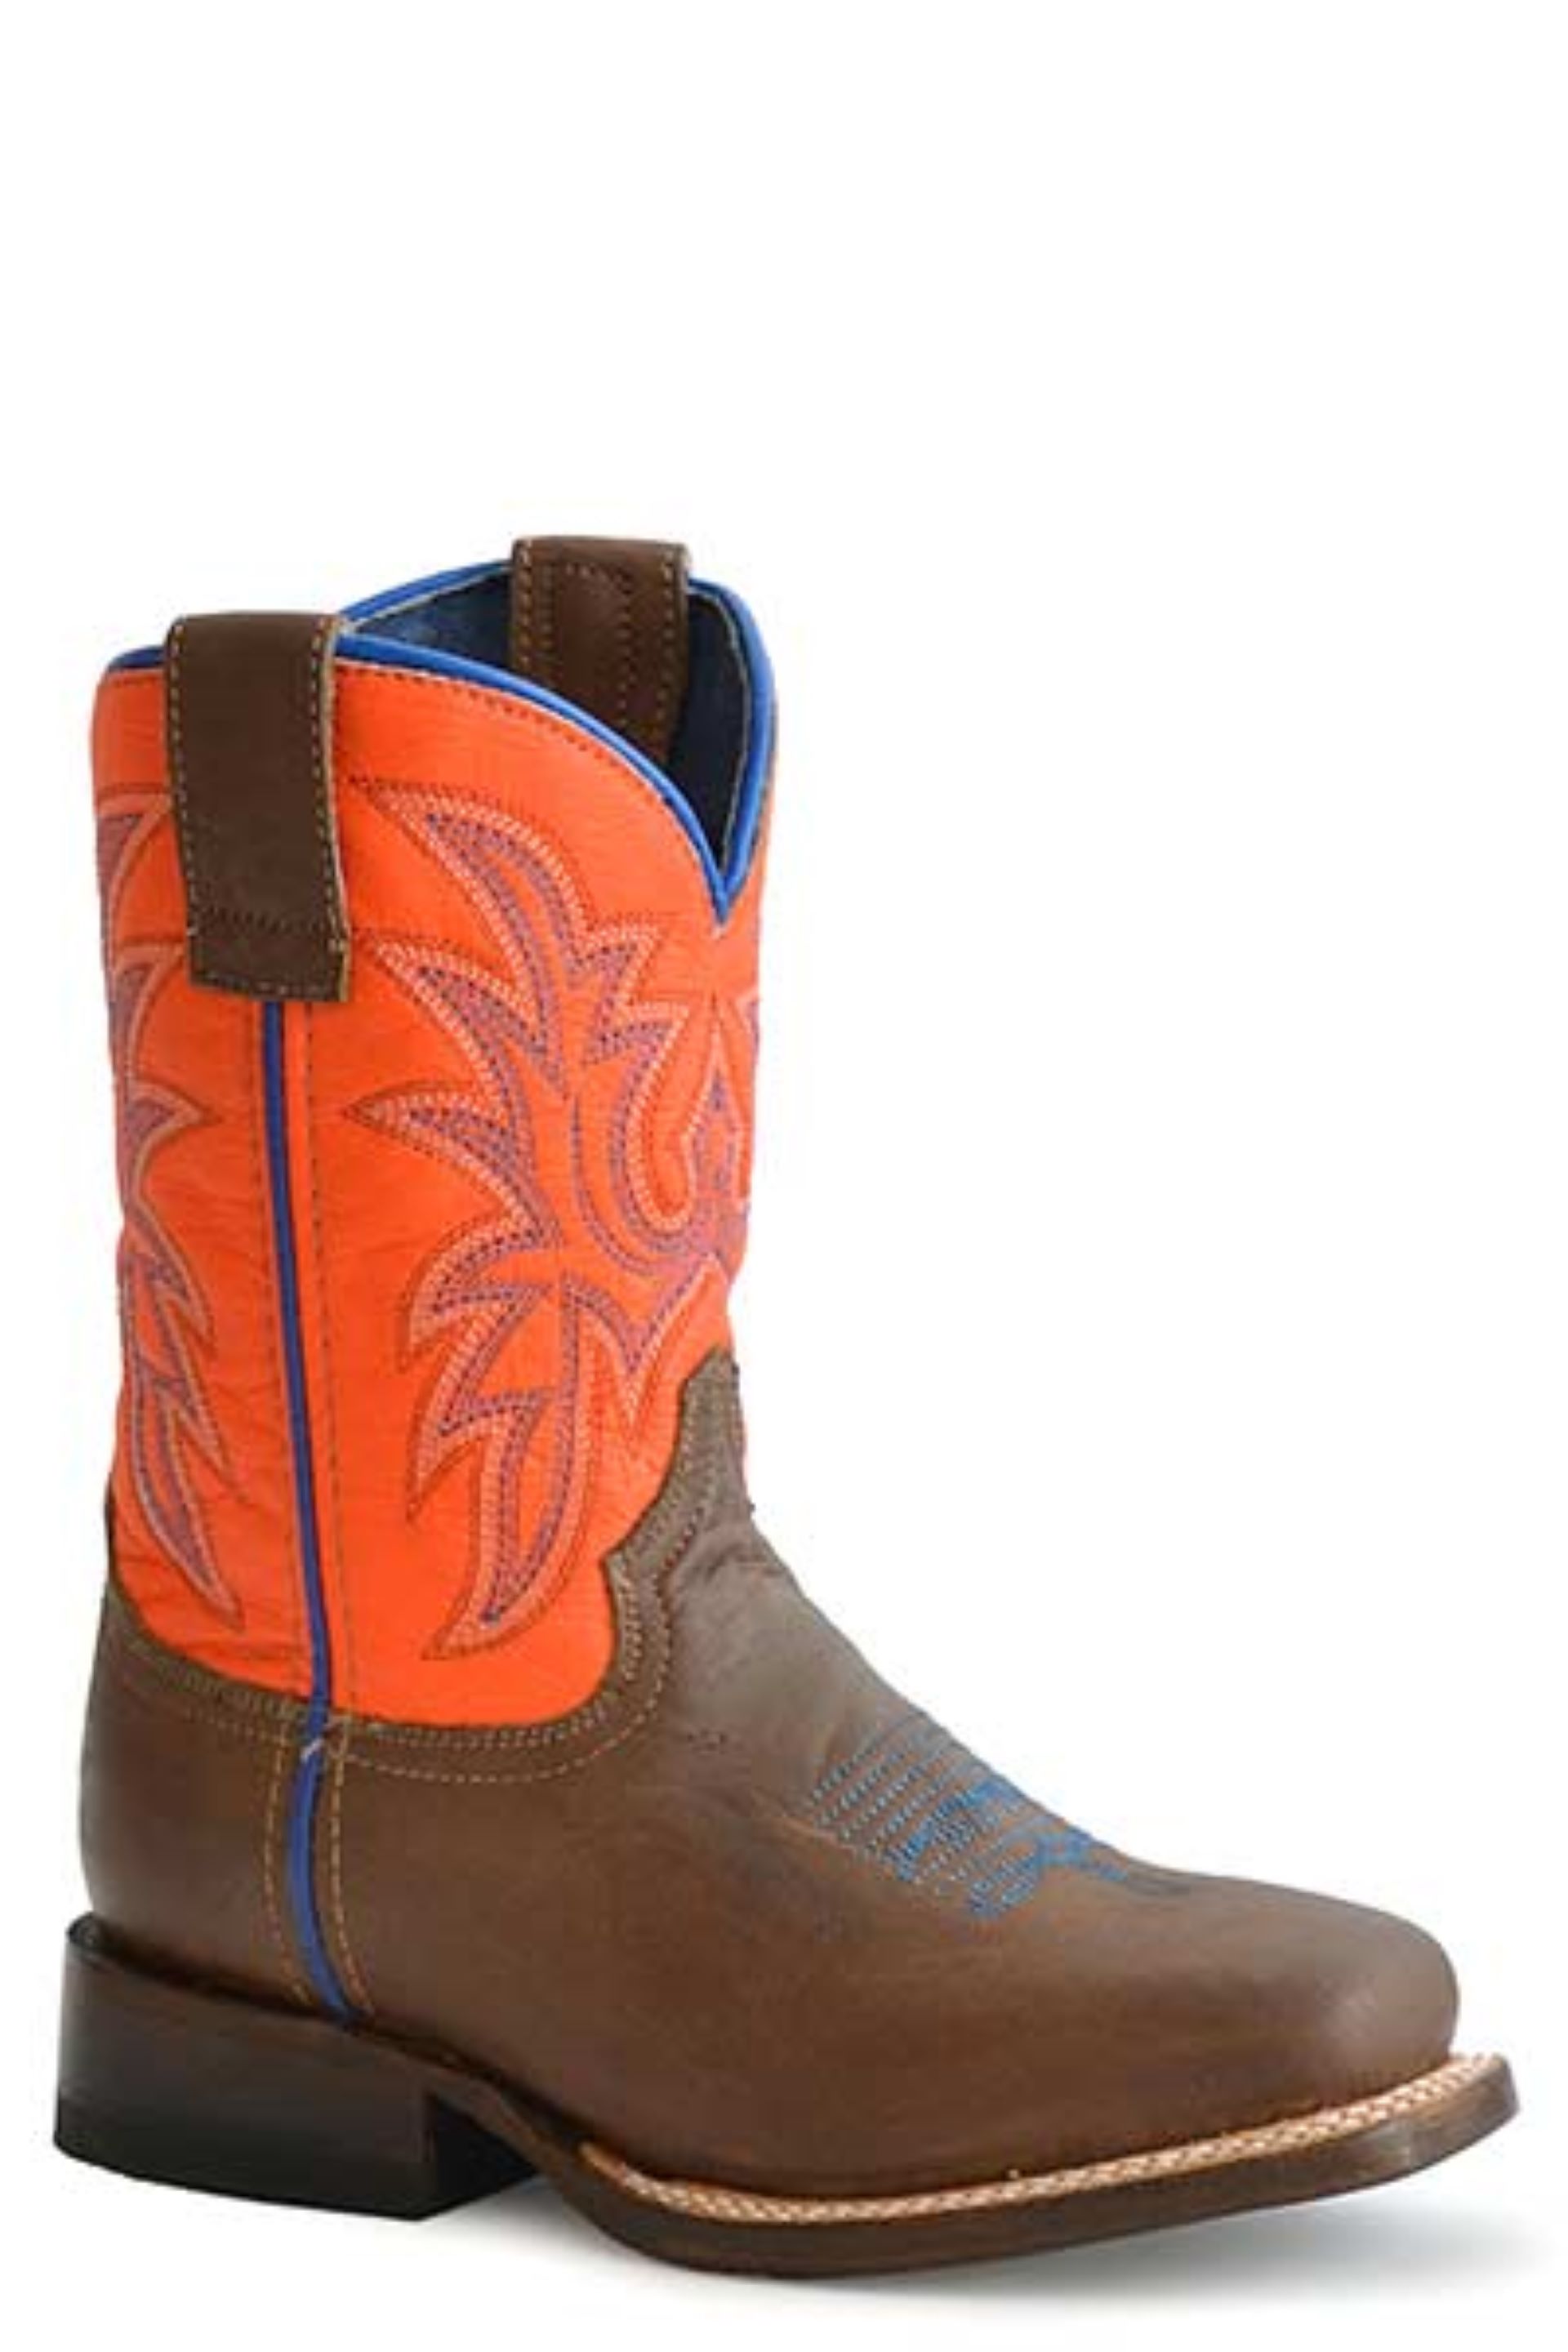 Youth Leather Cowboy Boot